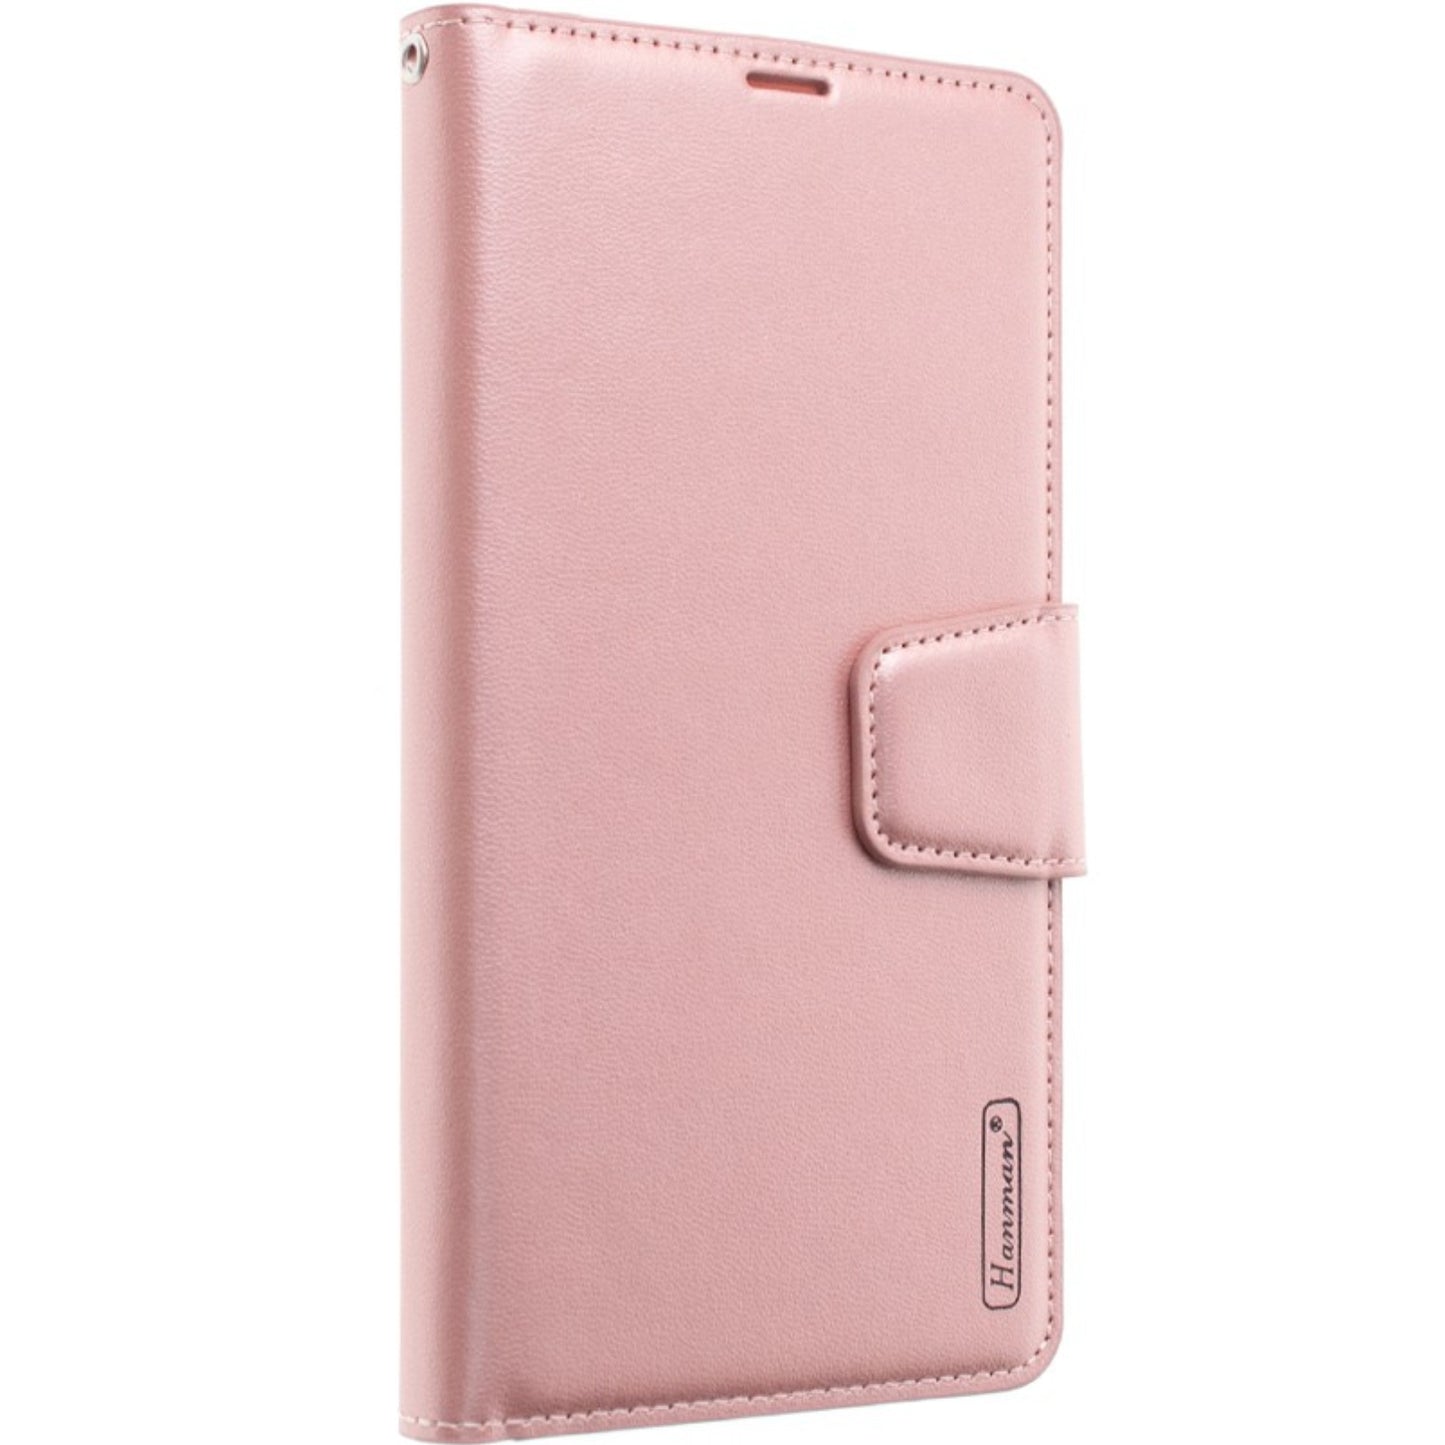 Hanman Pu Flip Leather Wallet Cover Case For Iphone 14 Pro